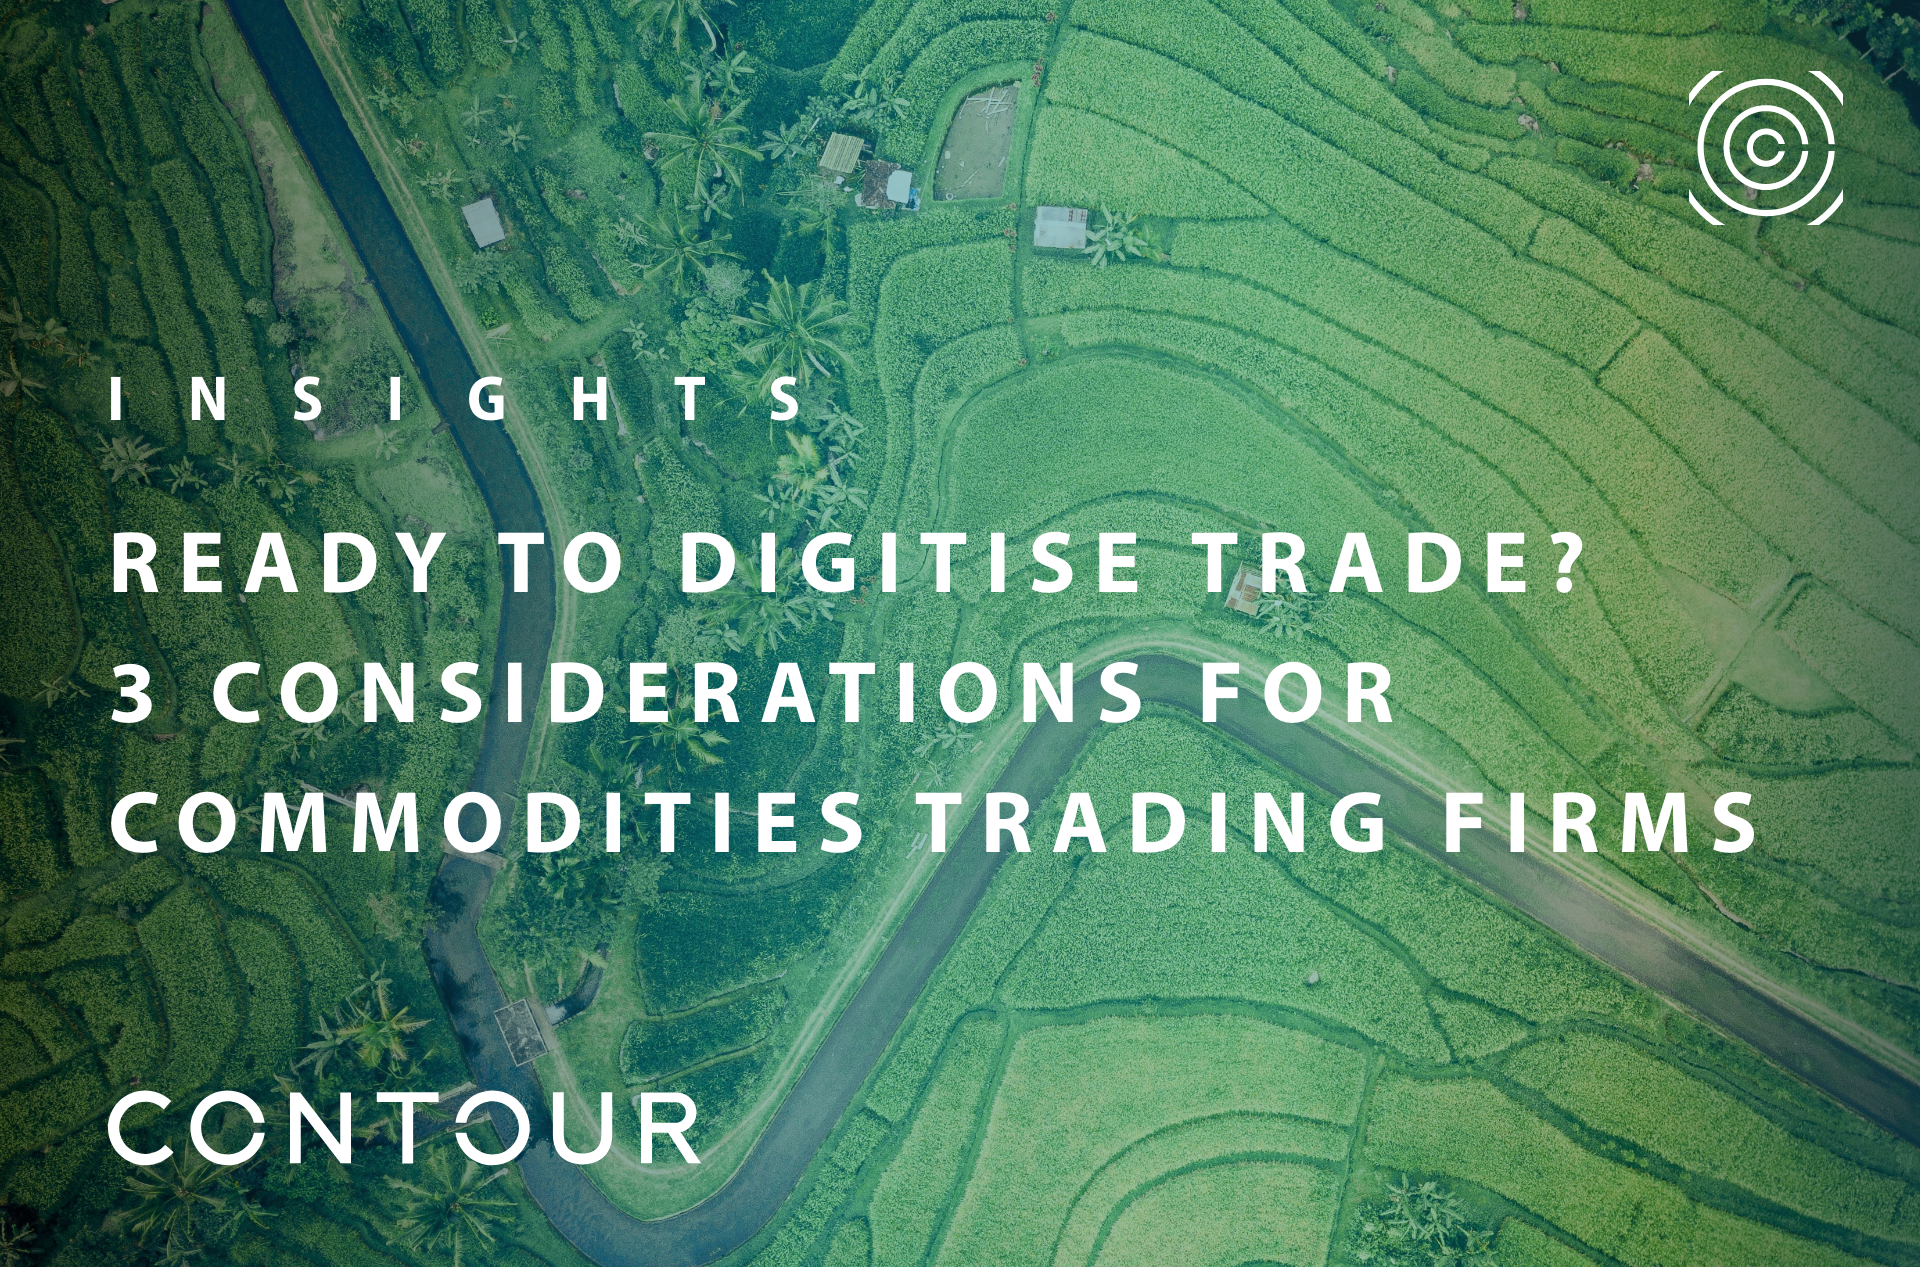 Ready to digitise trade? 3 considerations for commodities trading firms